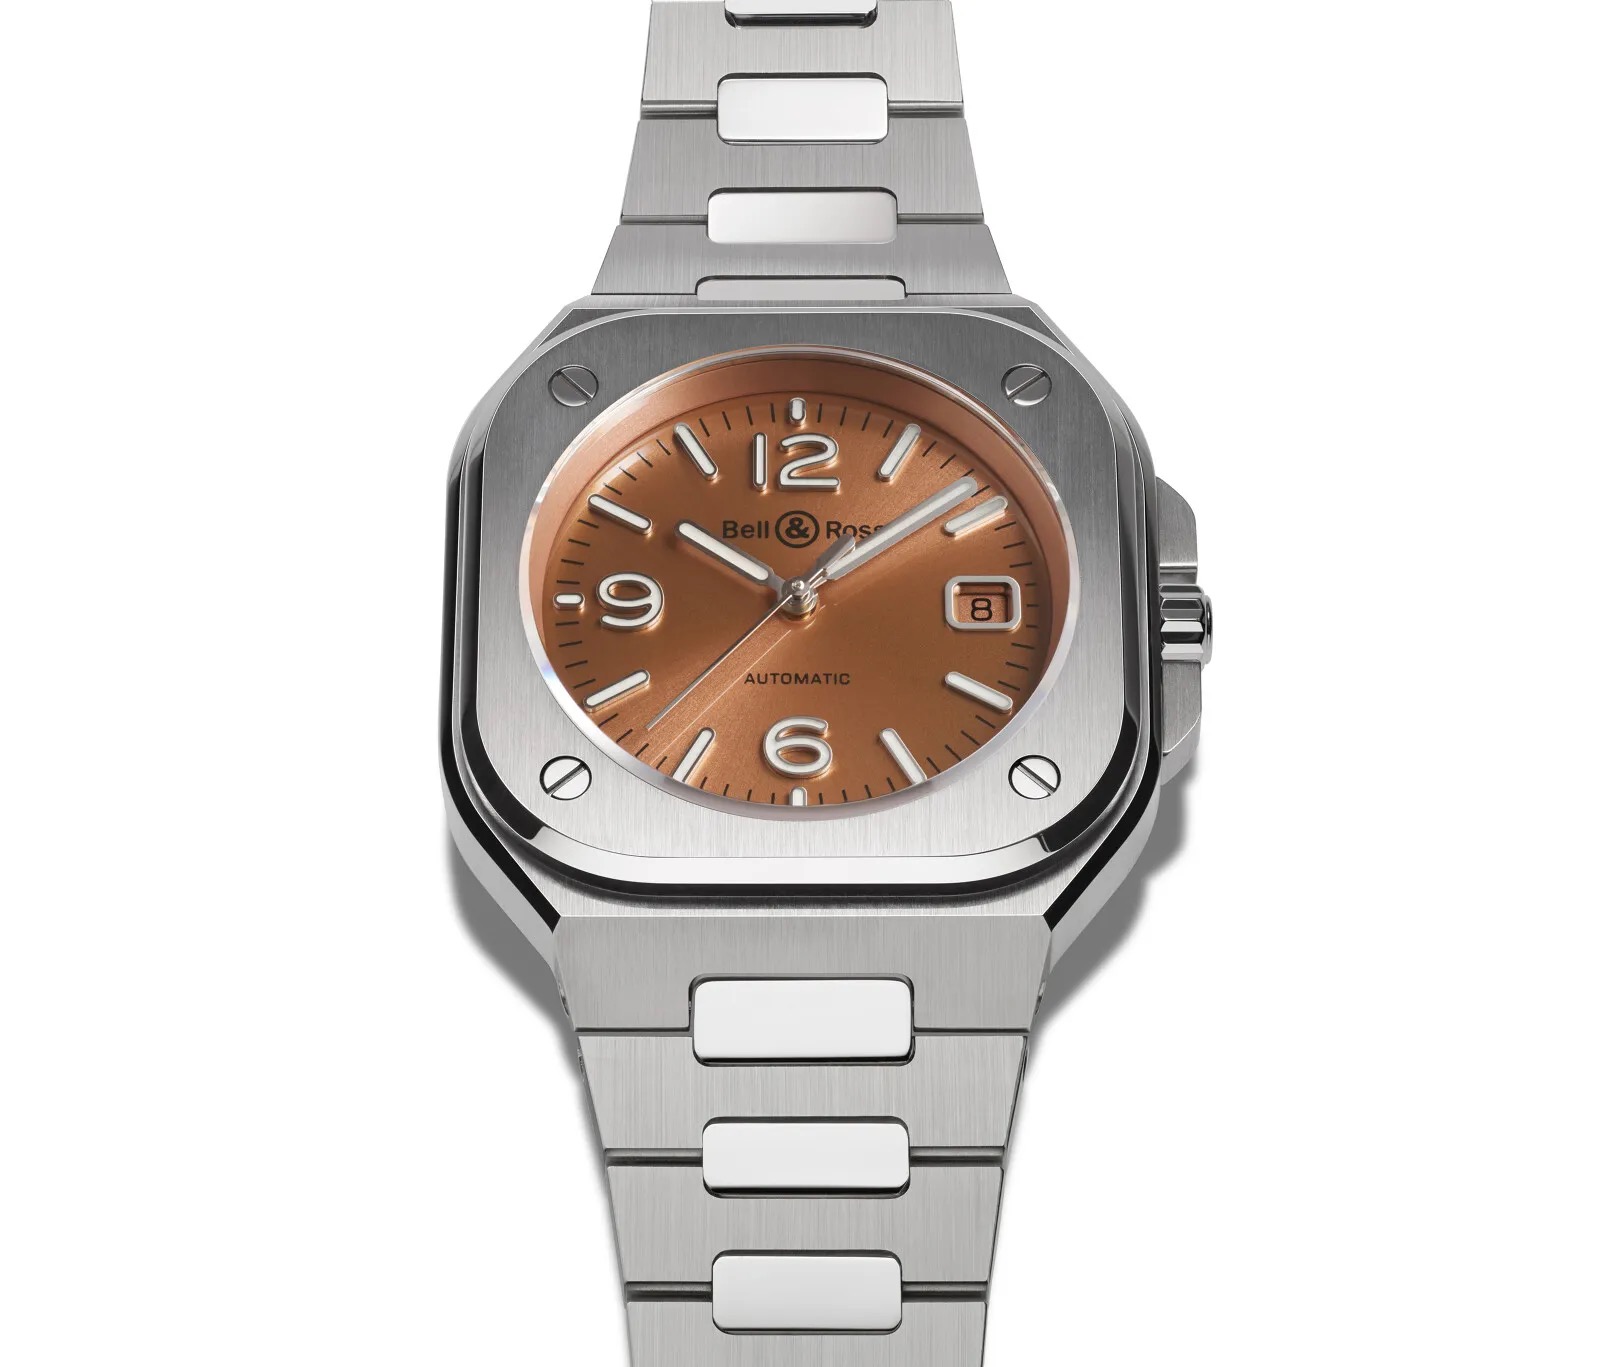 Bell & Ross BR05A-ST:SST Copper Brown